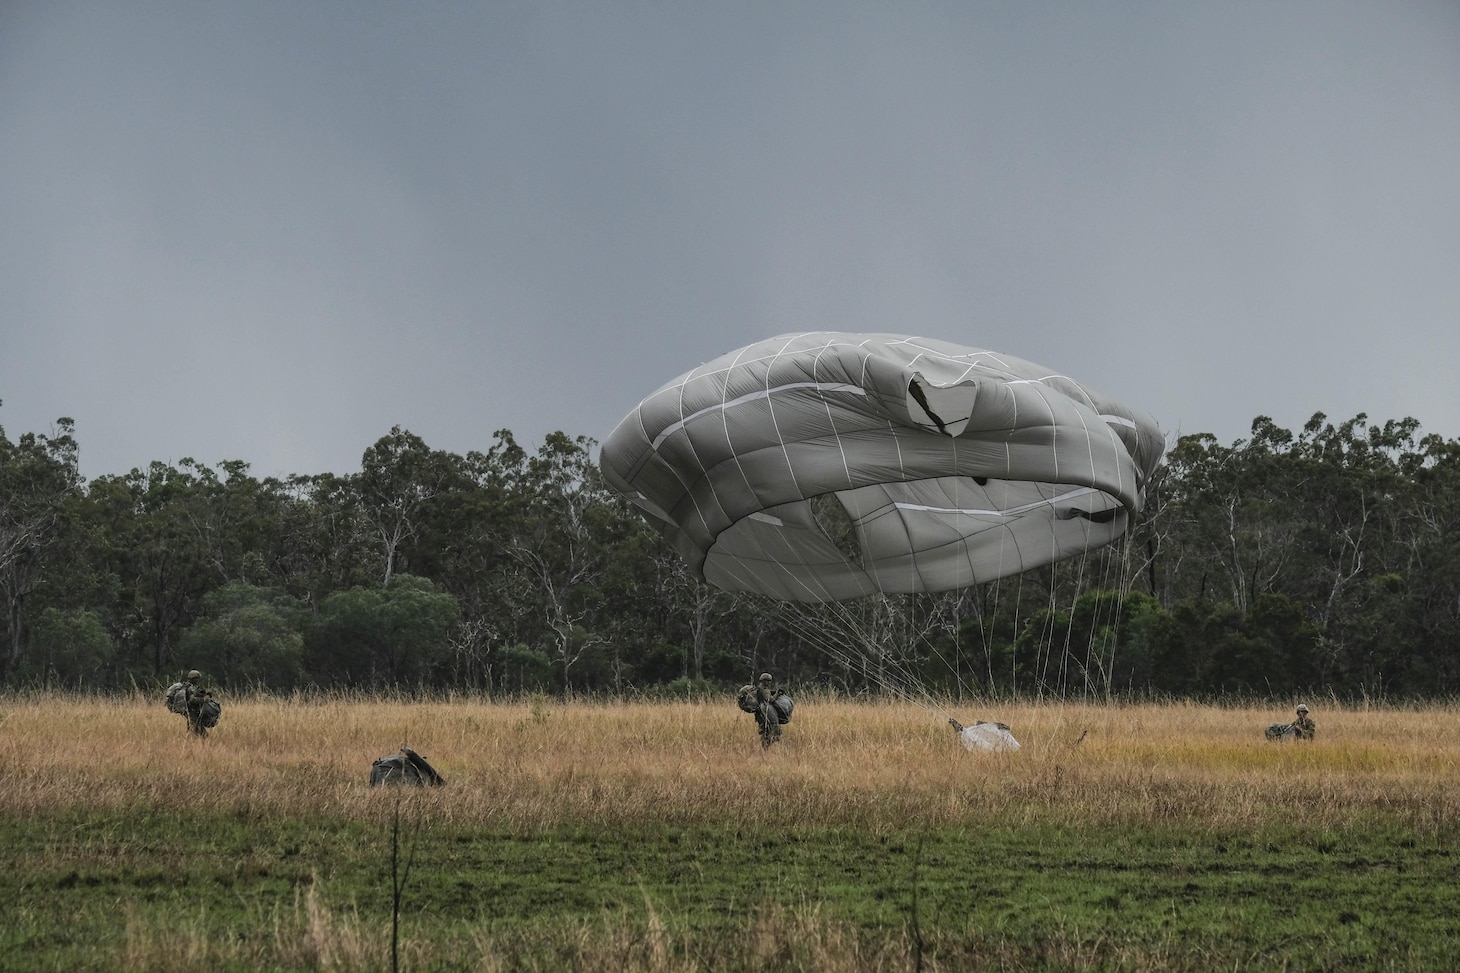 Paratroopers of 4th Infantry Brigade Combat Team (Airborne) 25th Infantry Division, move to a parachute collection zone while another lands in Shoalwater Bay, Queensland, Australia, July 13. The airborne operation was conducted as part of Exercise Talisman Sabre 2017, a massive, biennial exercise designed to exercise the partnership of joint forces throughout the Pacific region. (U.S. Army photo by Staff Sgt. Daniel Love)